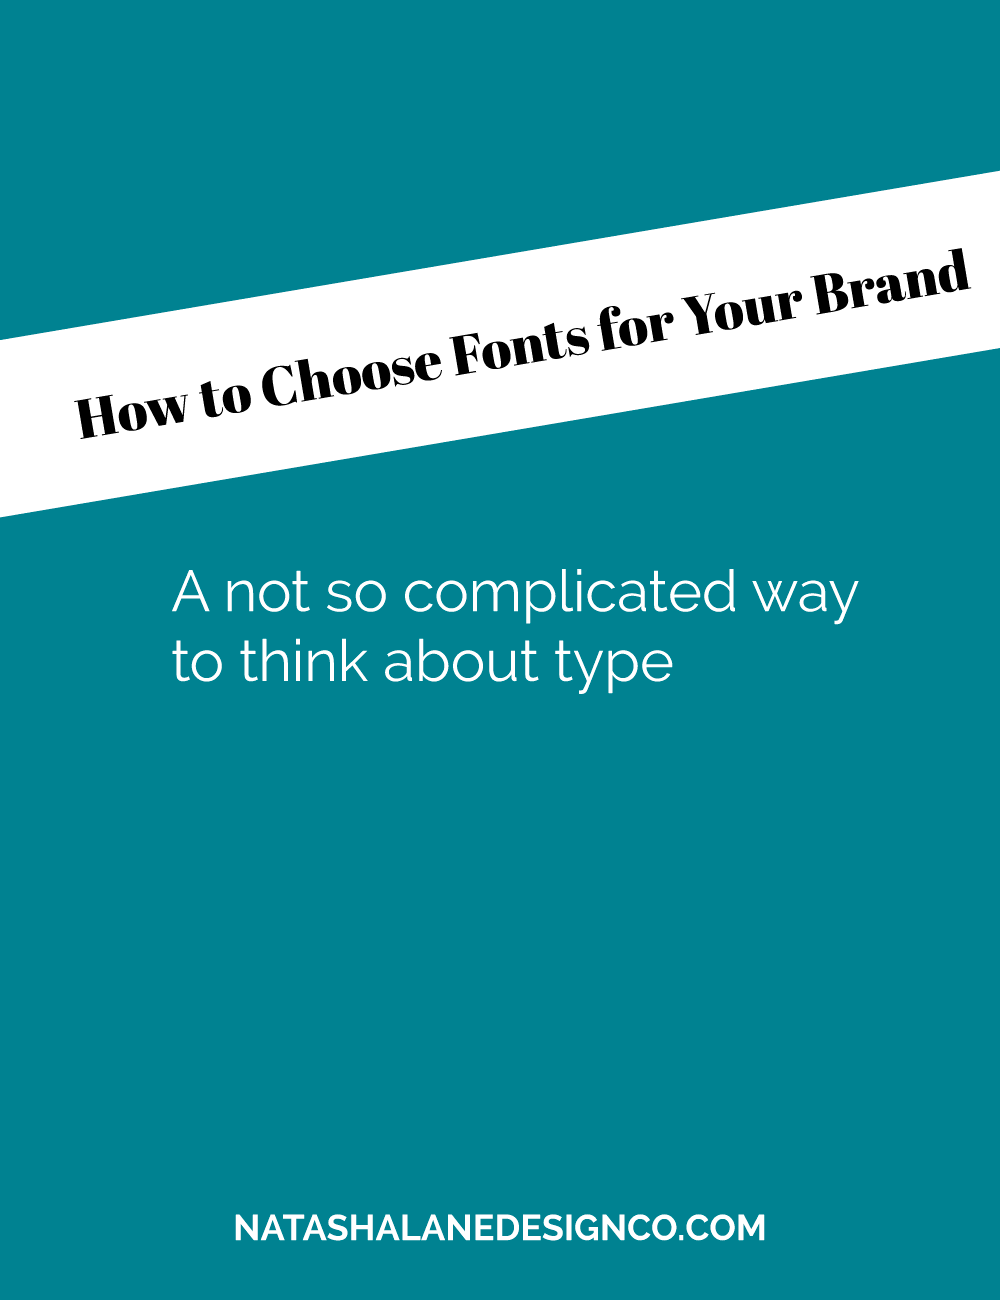 How to choose fonts for your brand